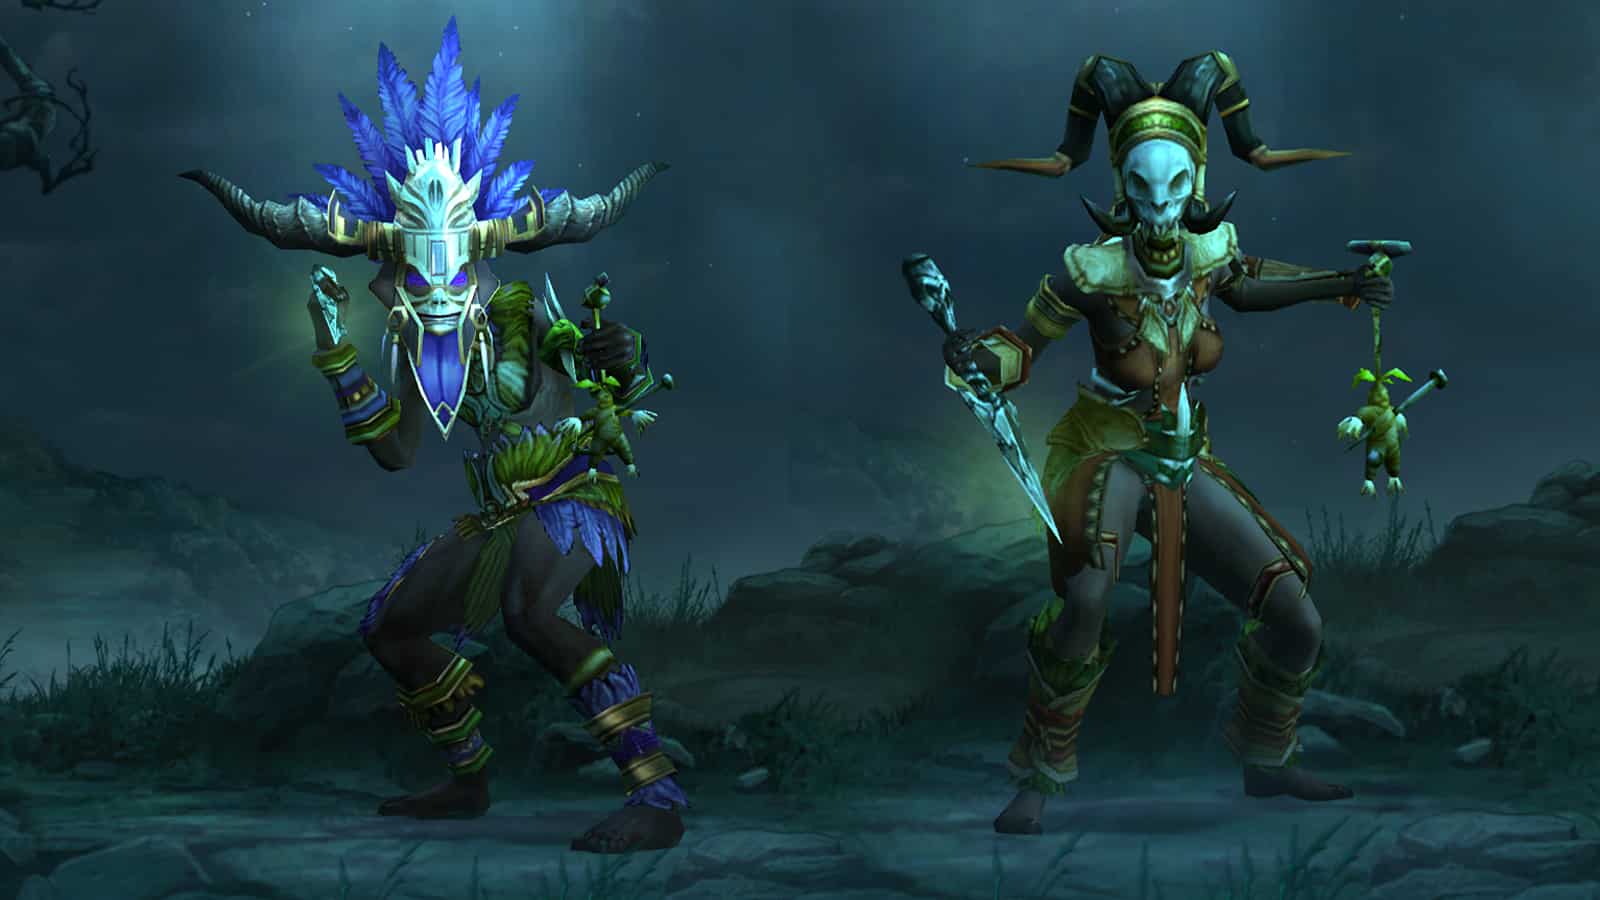 The Witch Doctor character class in Diablo 3